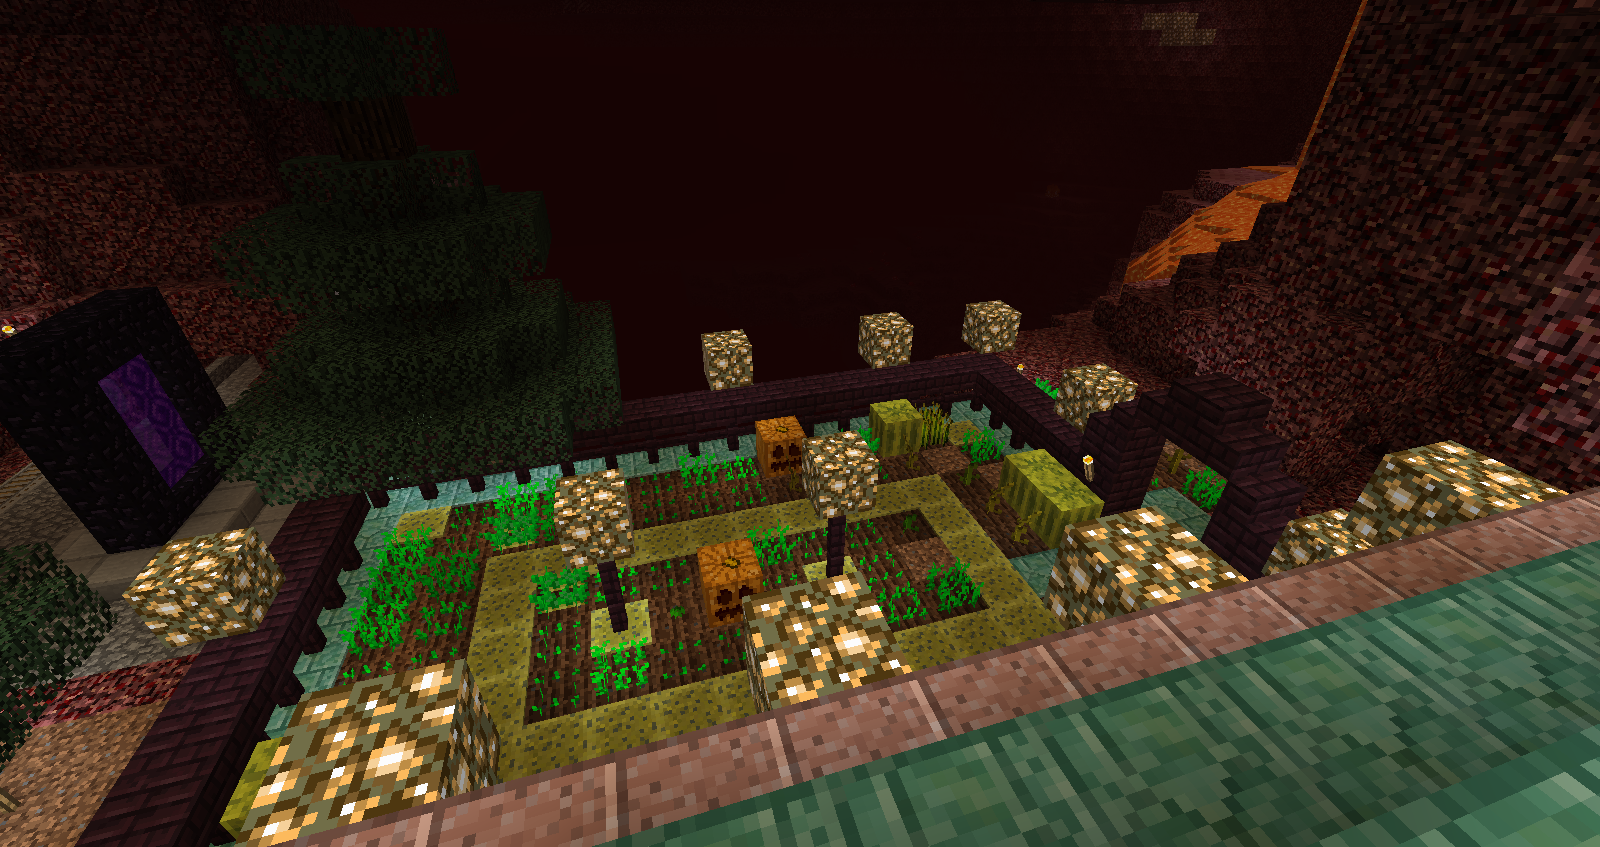 Feed your Minecraft farm with wet sponges!